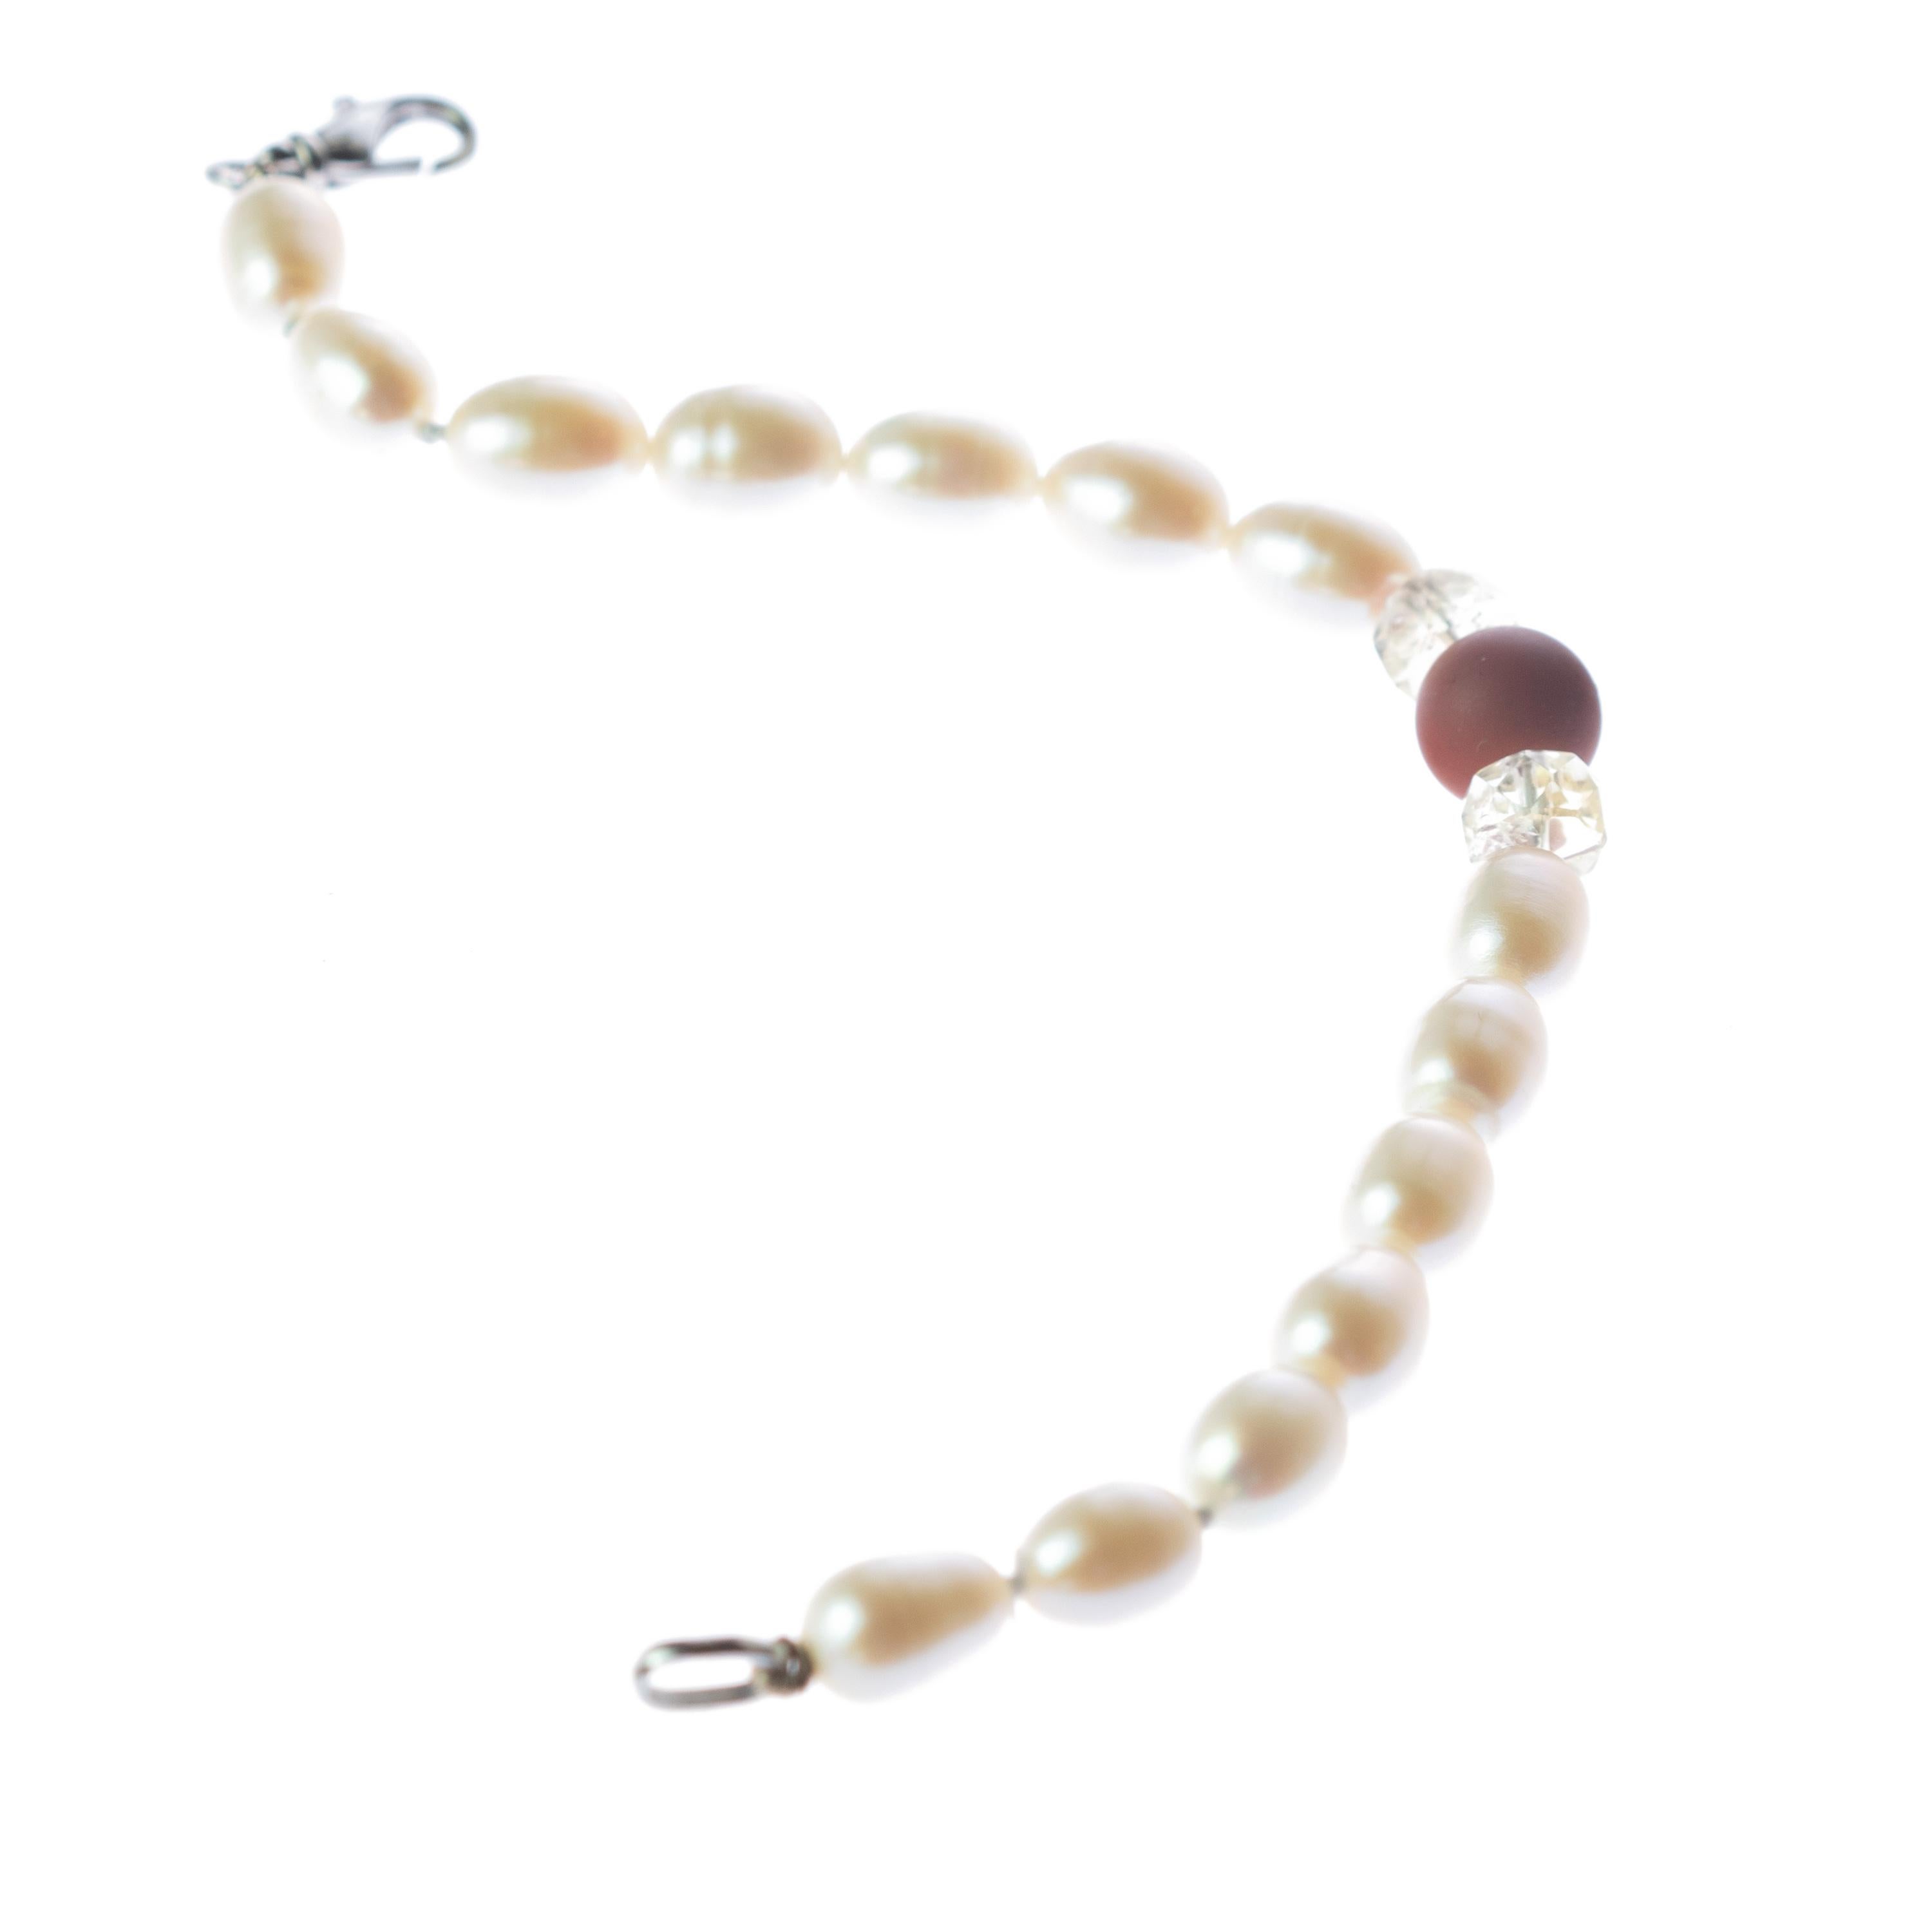 Freshwater Pearl, Rock Crystal and Diaspore bracelet full of design. A modern and delicate style for a young and fearless woman. Delight yourself with a luminous handmade jewelry. Natural precious stones beads with a silver closure. The perfect